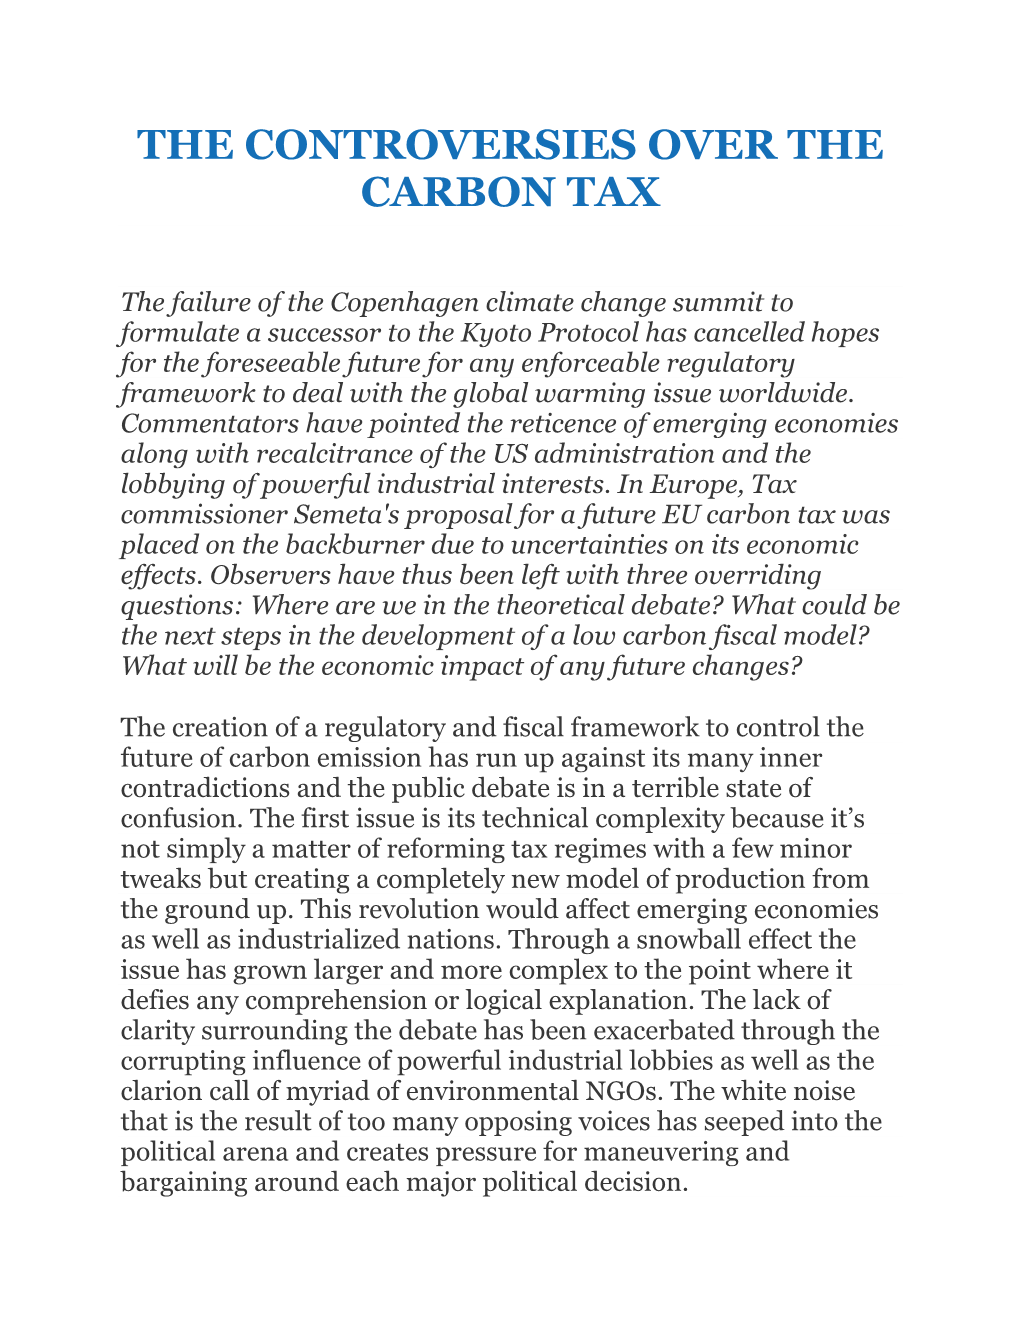 The Controversies Over the Carbon Tax